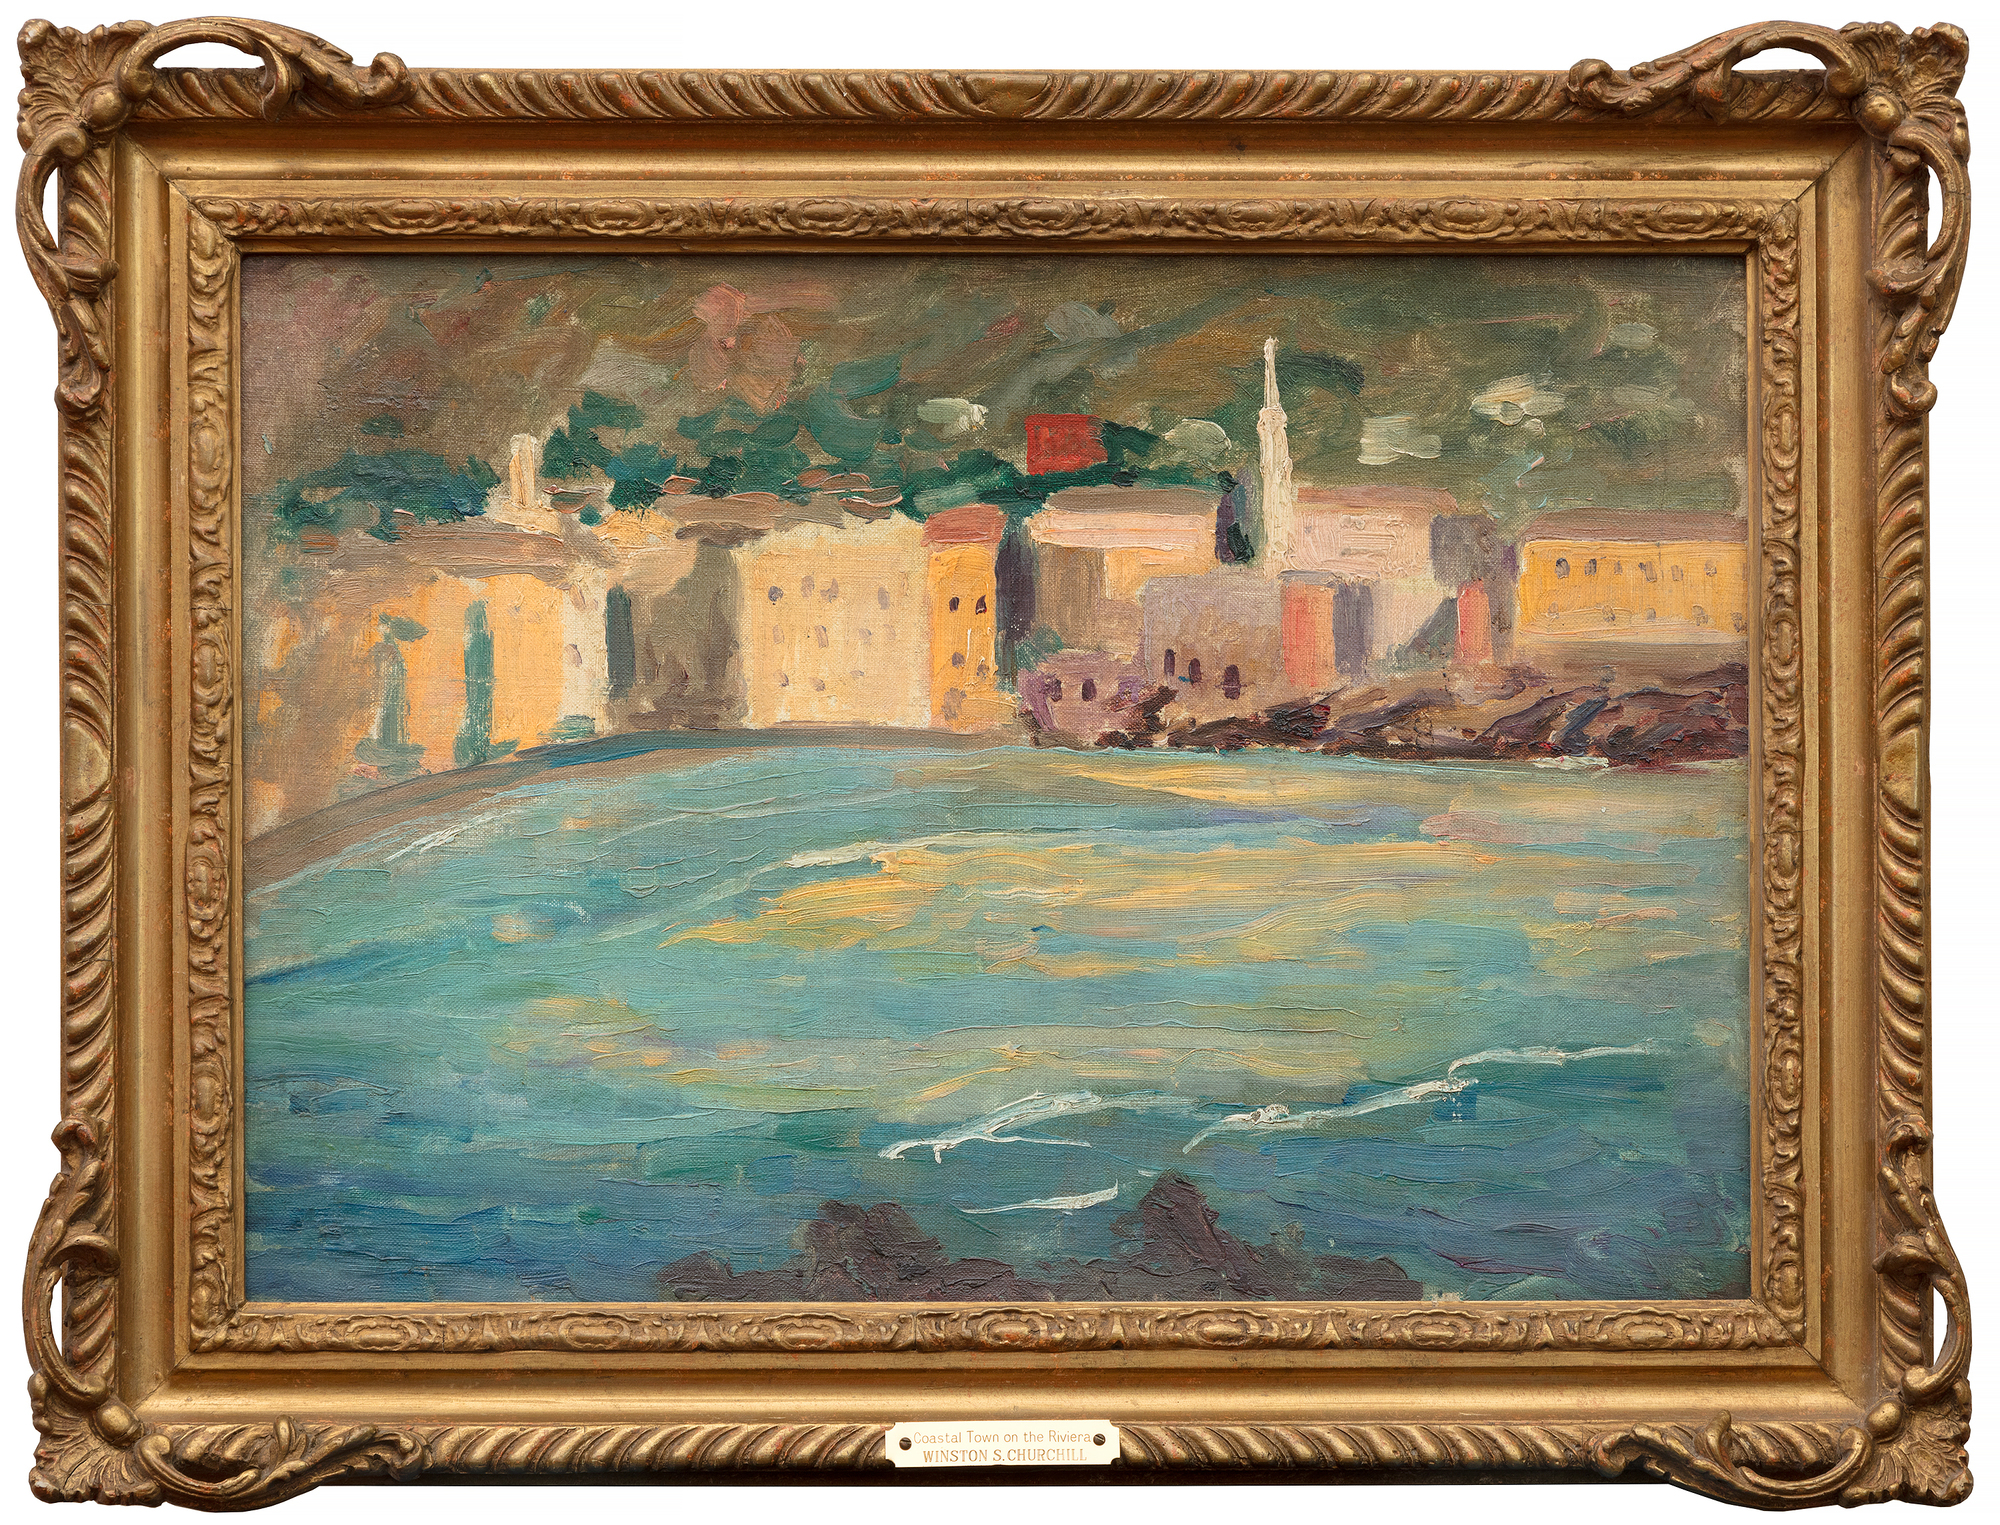 Uniquely among Winston Churchill’s known work, “Coastal Town on the Riviera” is in fact a double painting with the landscape on one side and an oil sketch on the other. The portrait sketch bears some resemblance to Viscountess Castlerosse who was a frequent guest in the same Rivera estates where Churchill visited. Churchill painted her in C 517 and C 518 and gives us a larger picture of the people who inhabited his world. &lt;br&gt;&lt;br&gt;Of his approximately 550 works, the largest portion (about 150) were of the South of France, where Churchill could indulge in both the array of colors to apply to his canvas and in gambling, given the proximity of Monte Carlo.